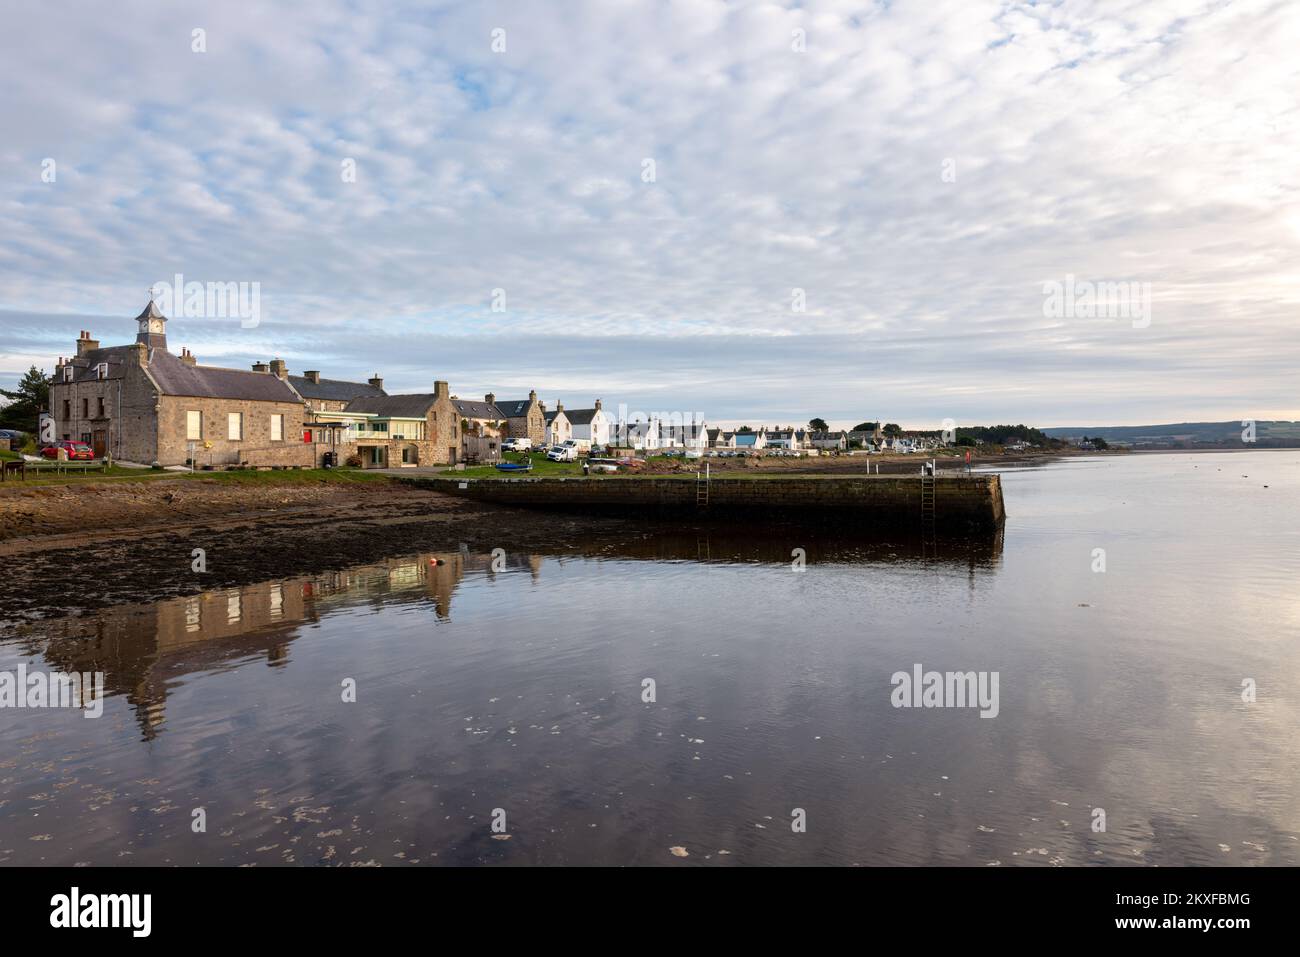 30 November 2022. Findhorn,Moray,Scotland. This is the buildings in the small village of Findhorn being reflected on the bays water. Stock Photo